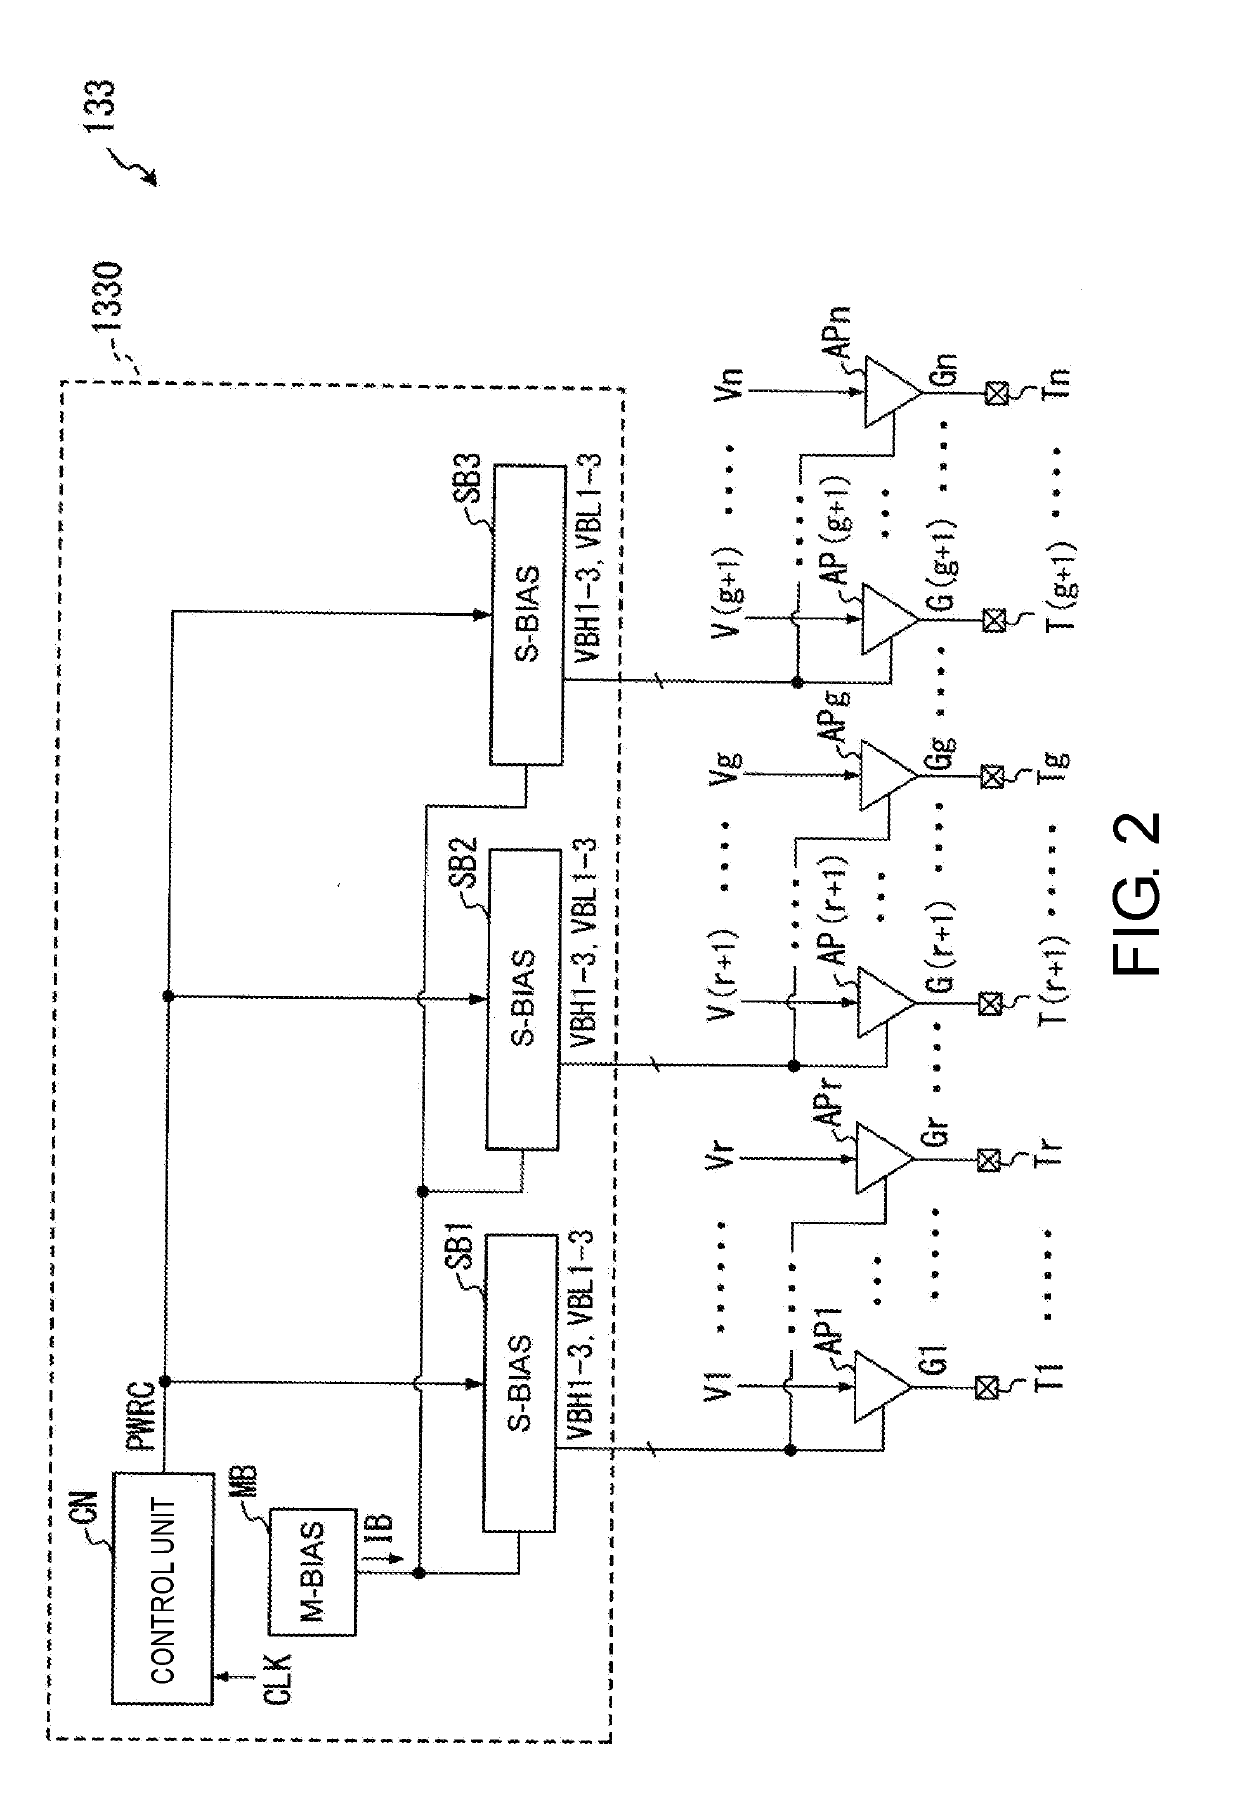 Display driver and semiconductor device